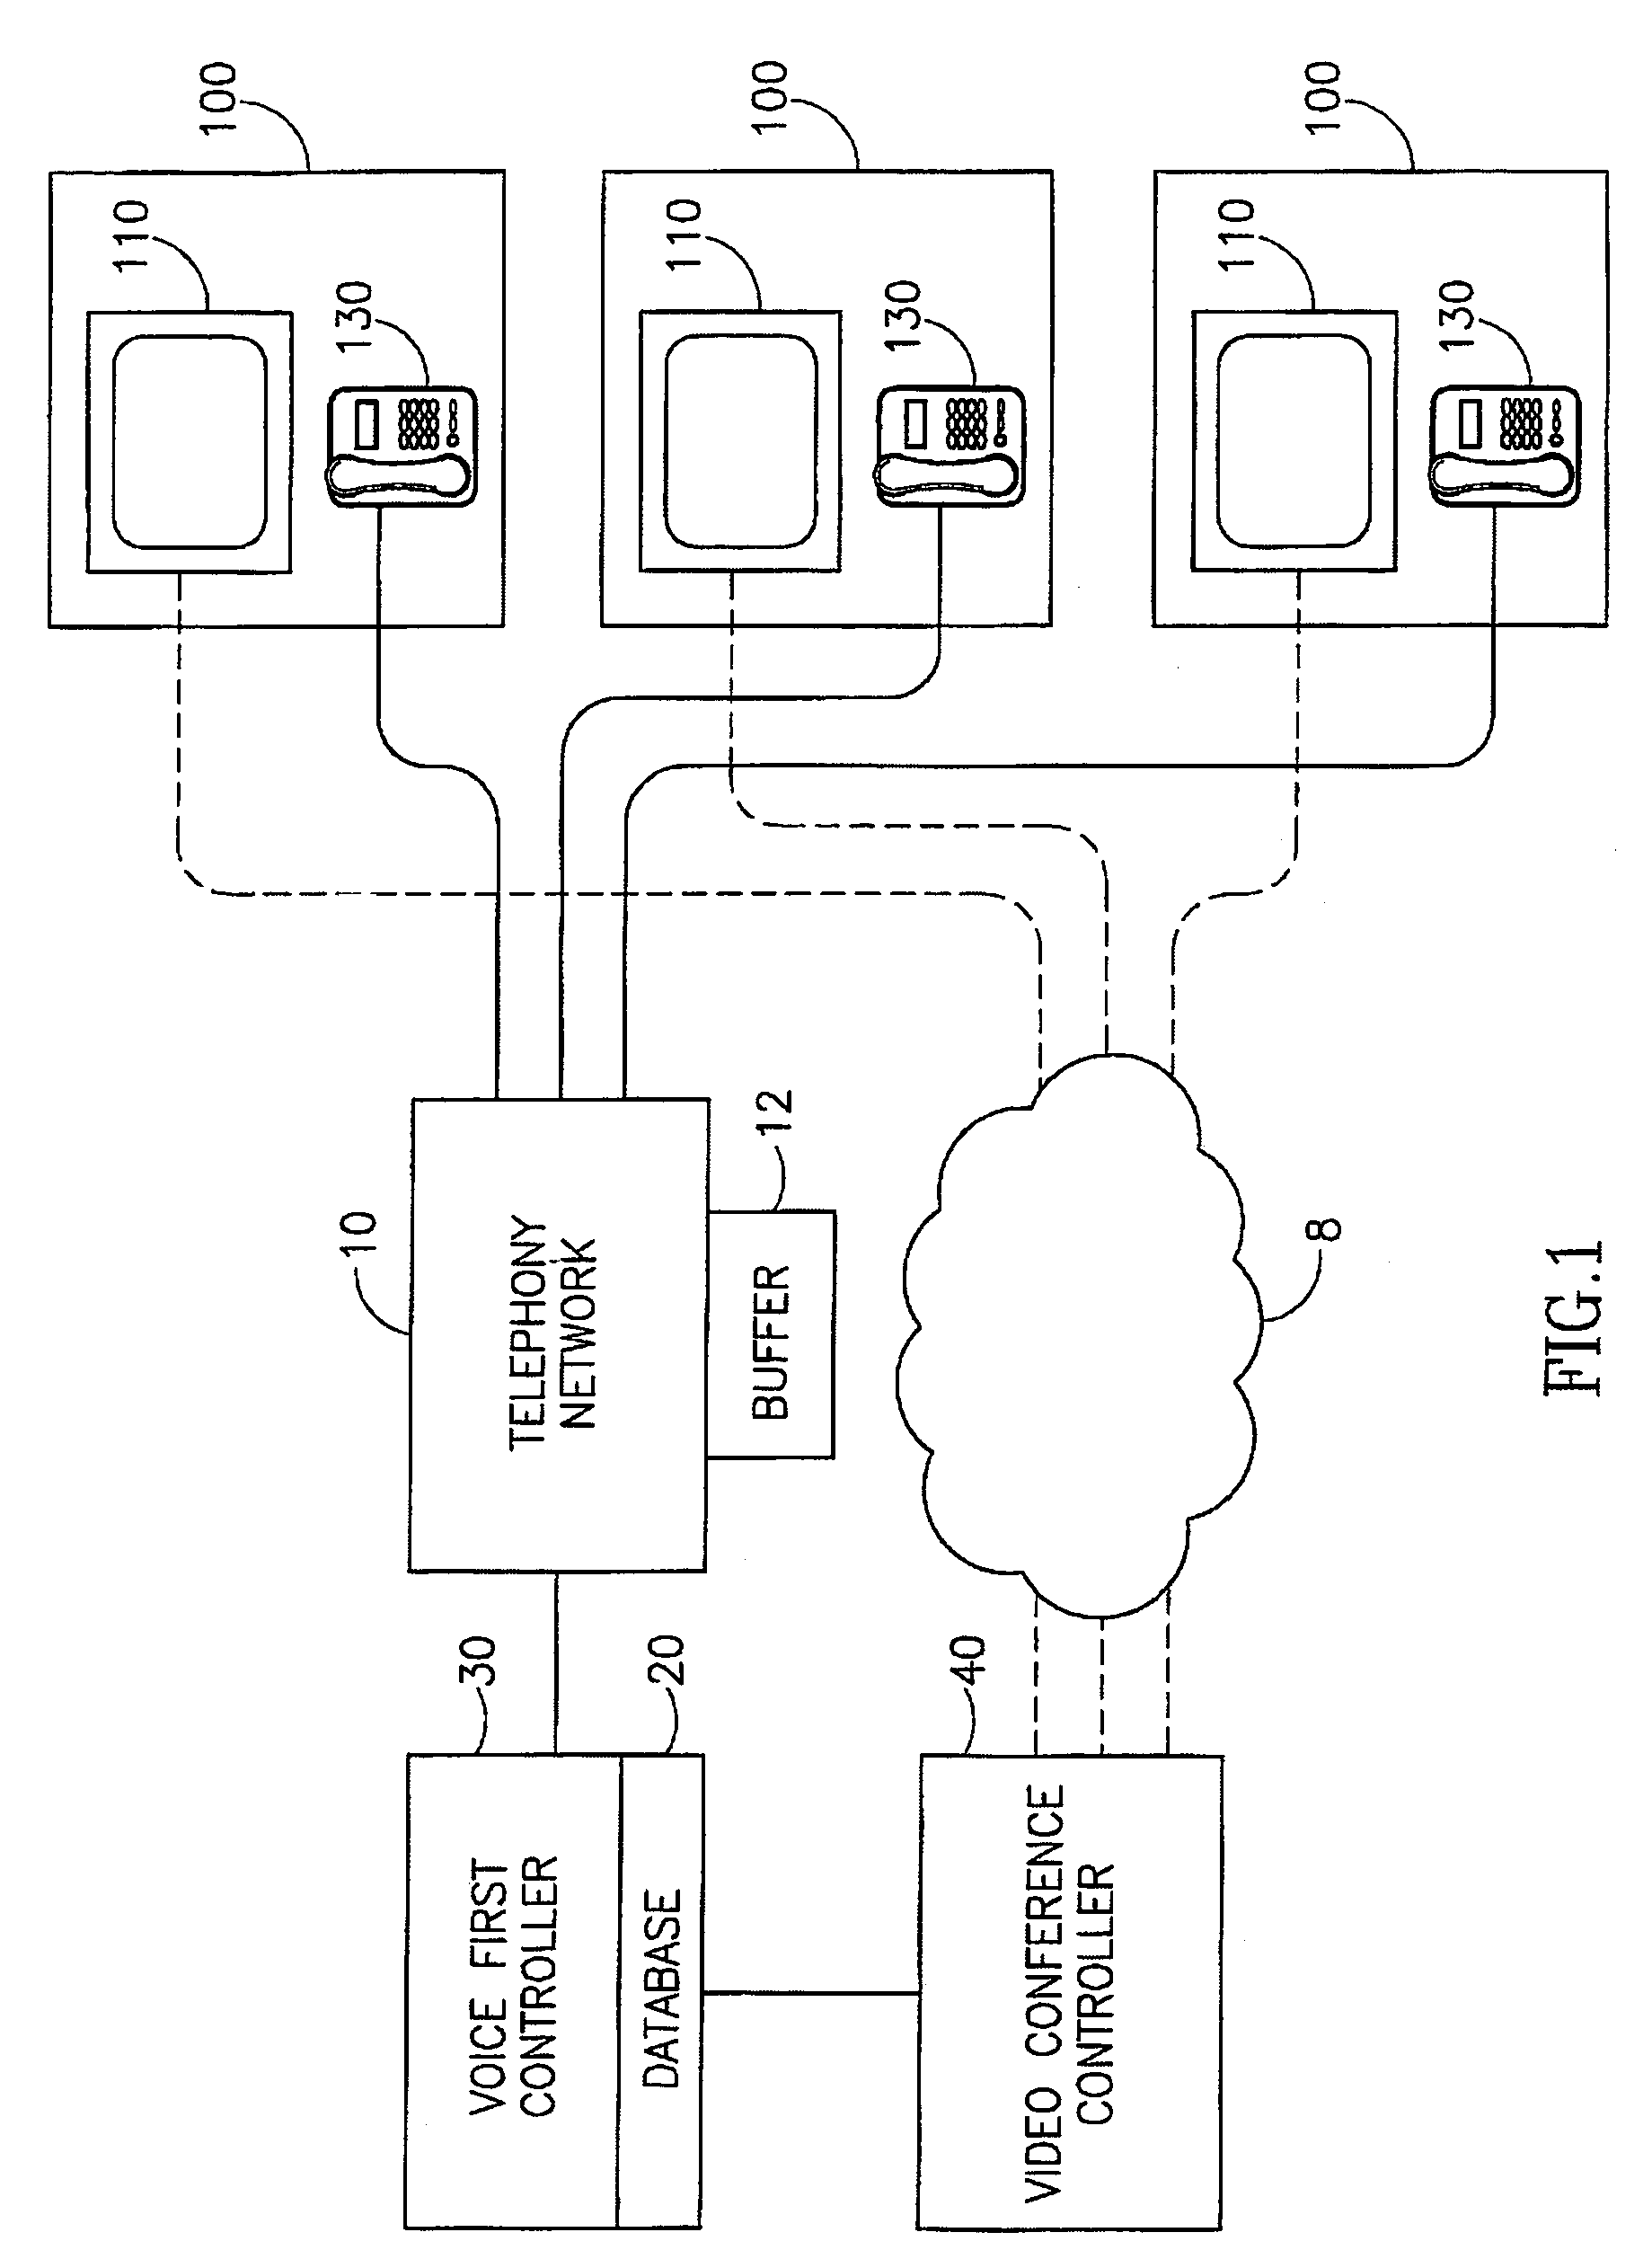 Systems and methods for videoconference and/or data collaboration initiation